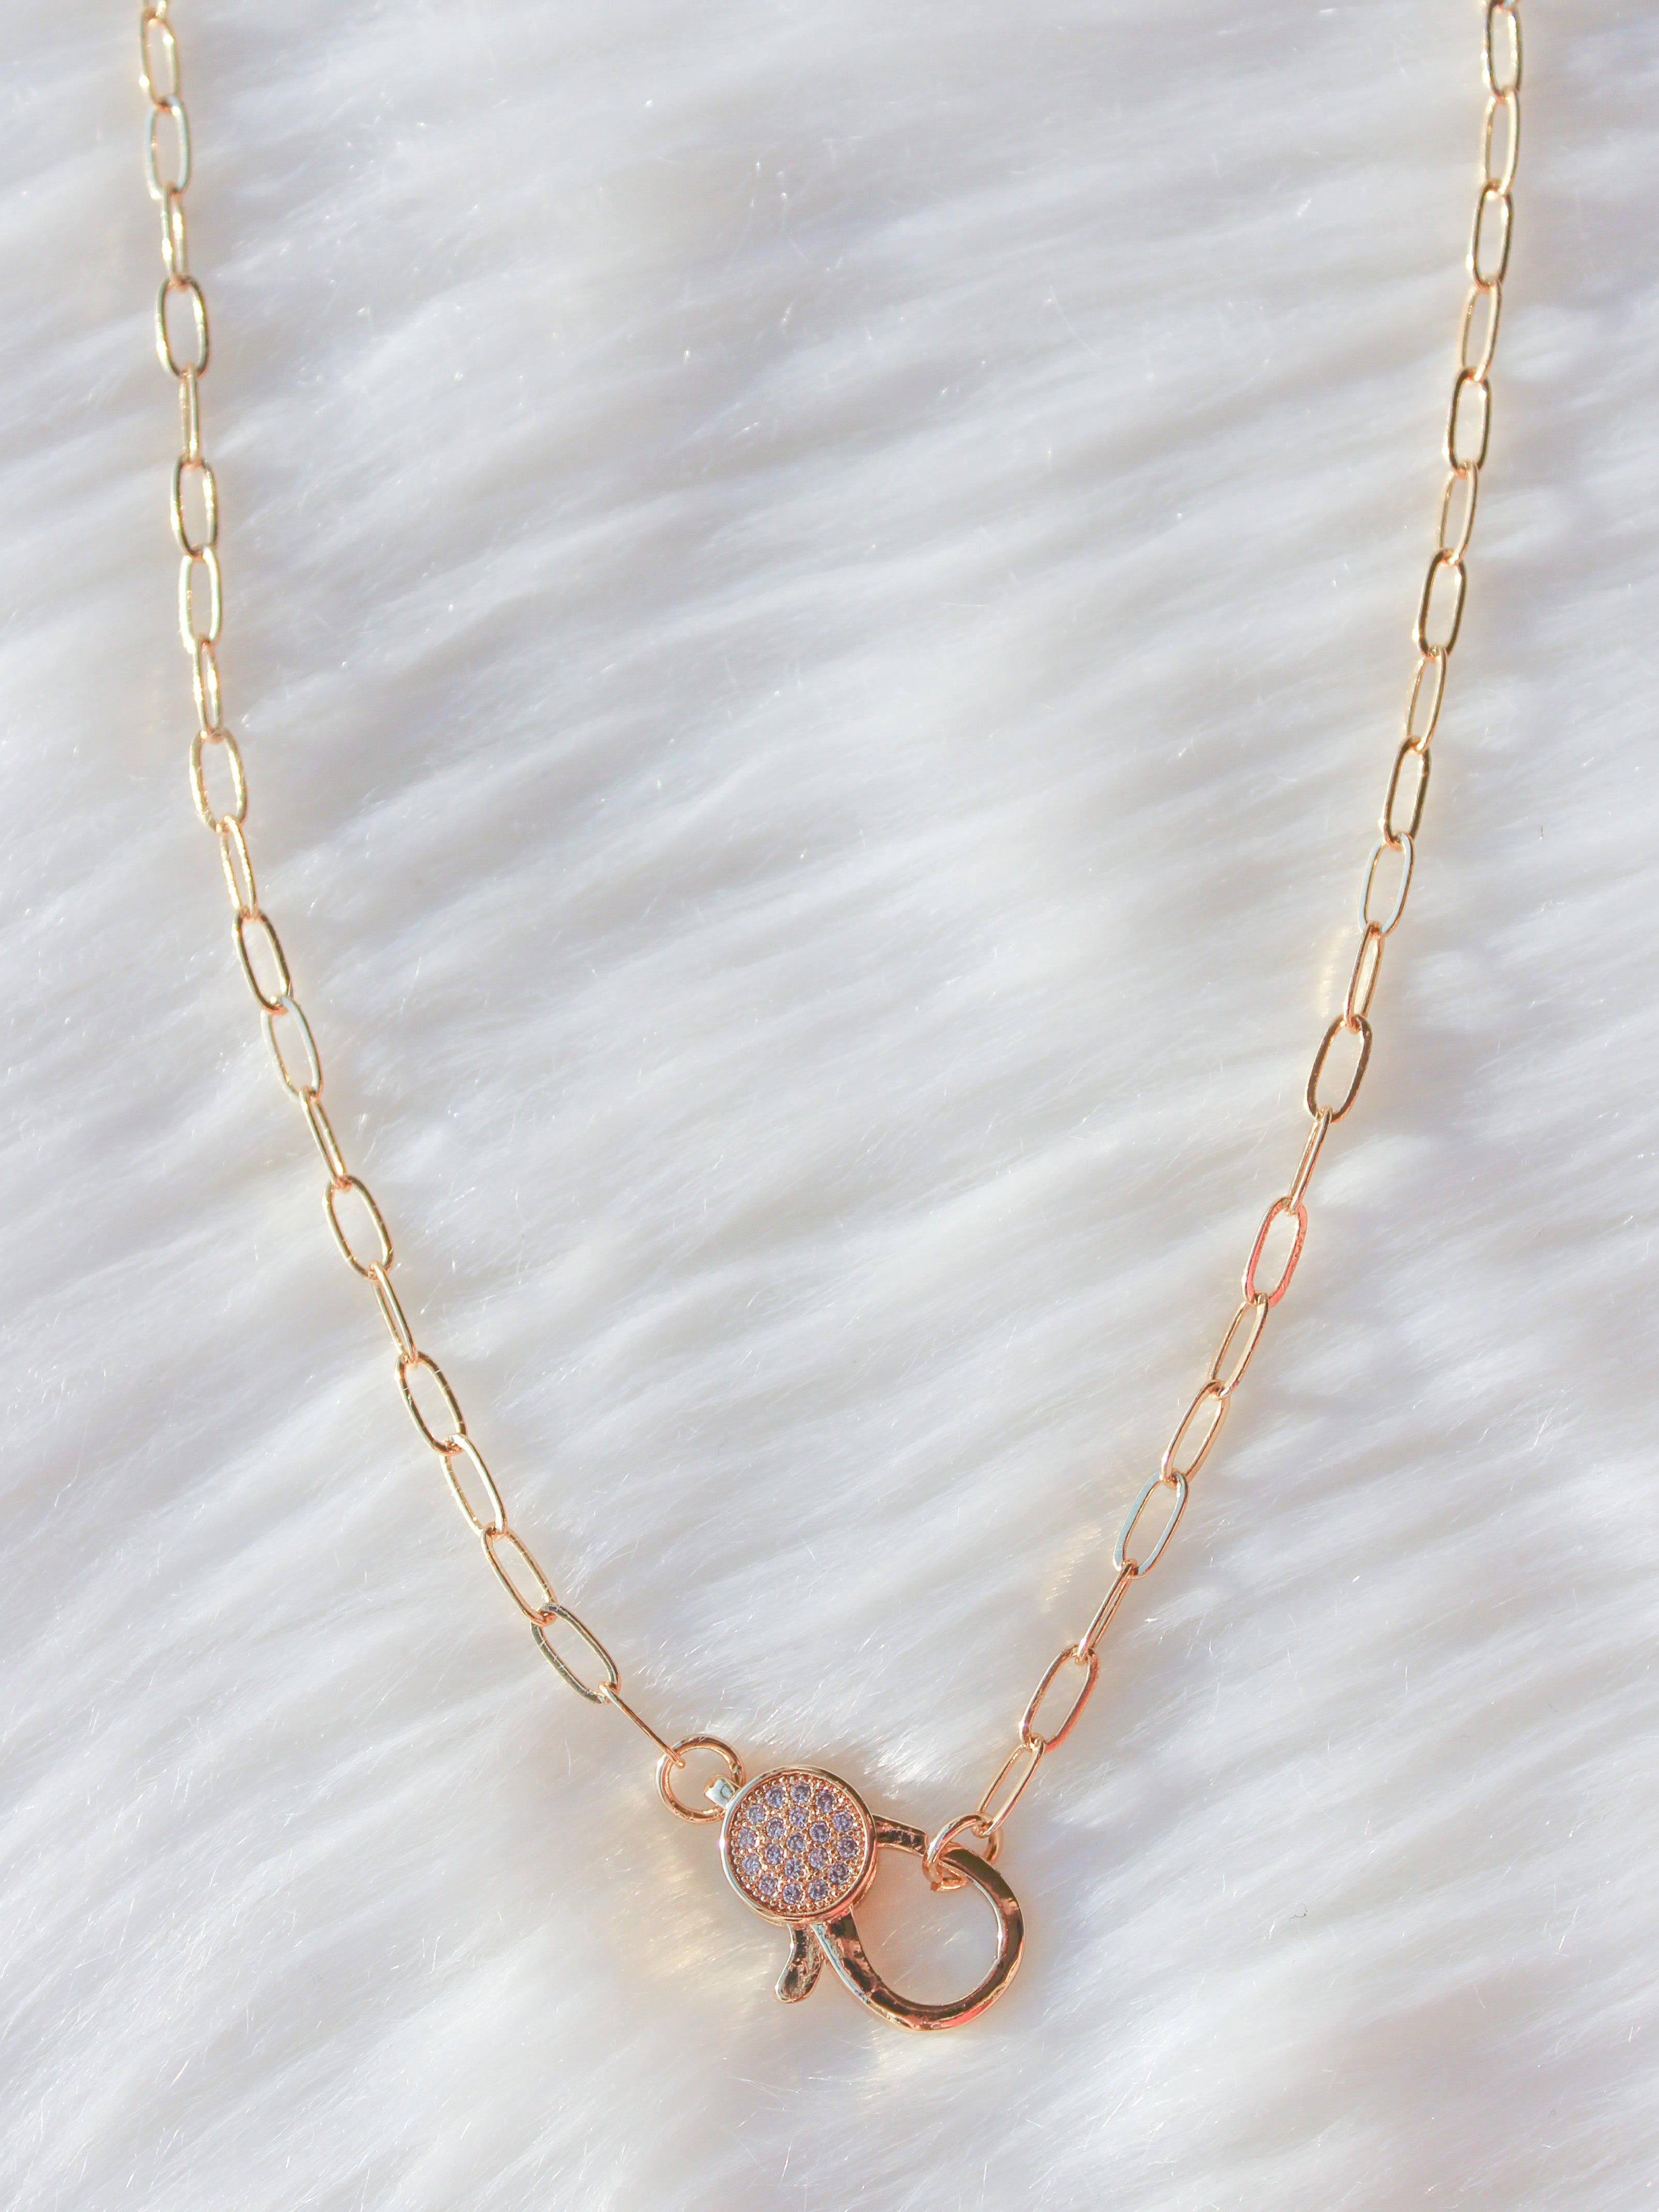 A 42-inch long gold-colored chain link necklace with no clasp. All of the  links are approximately the same size and are slightly concave in shape.  Each link has a visible soldered seam.